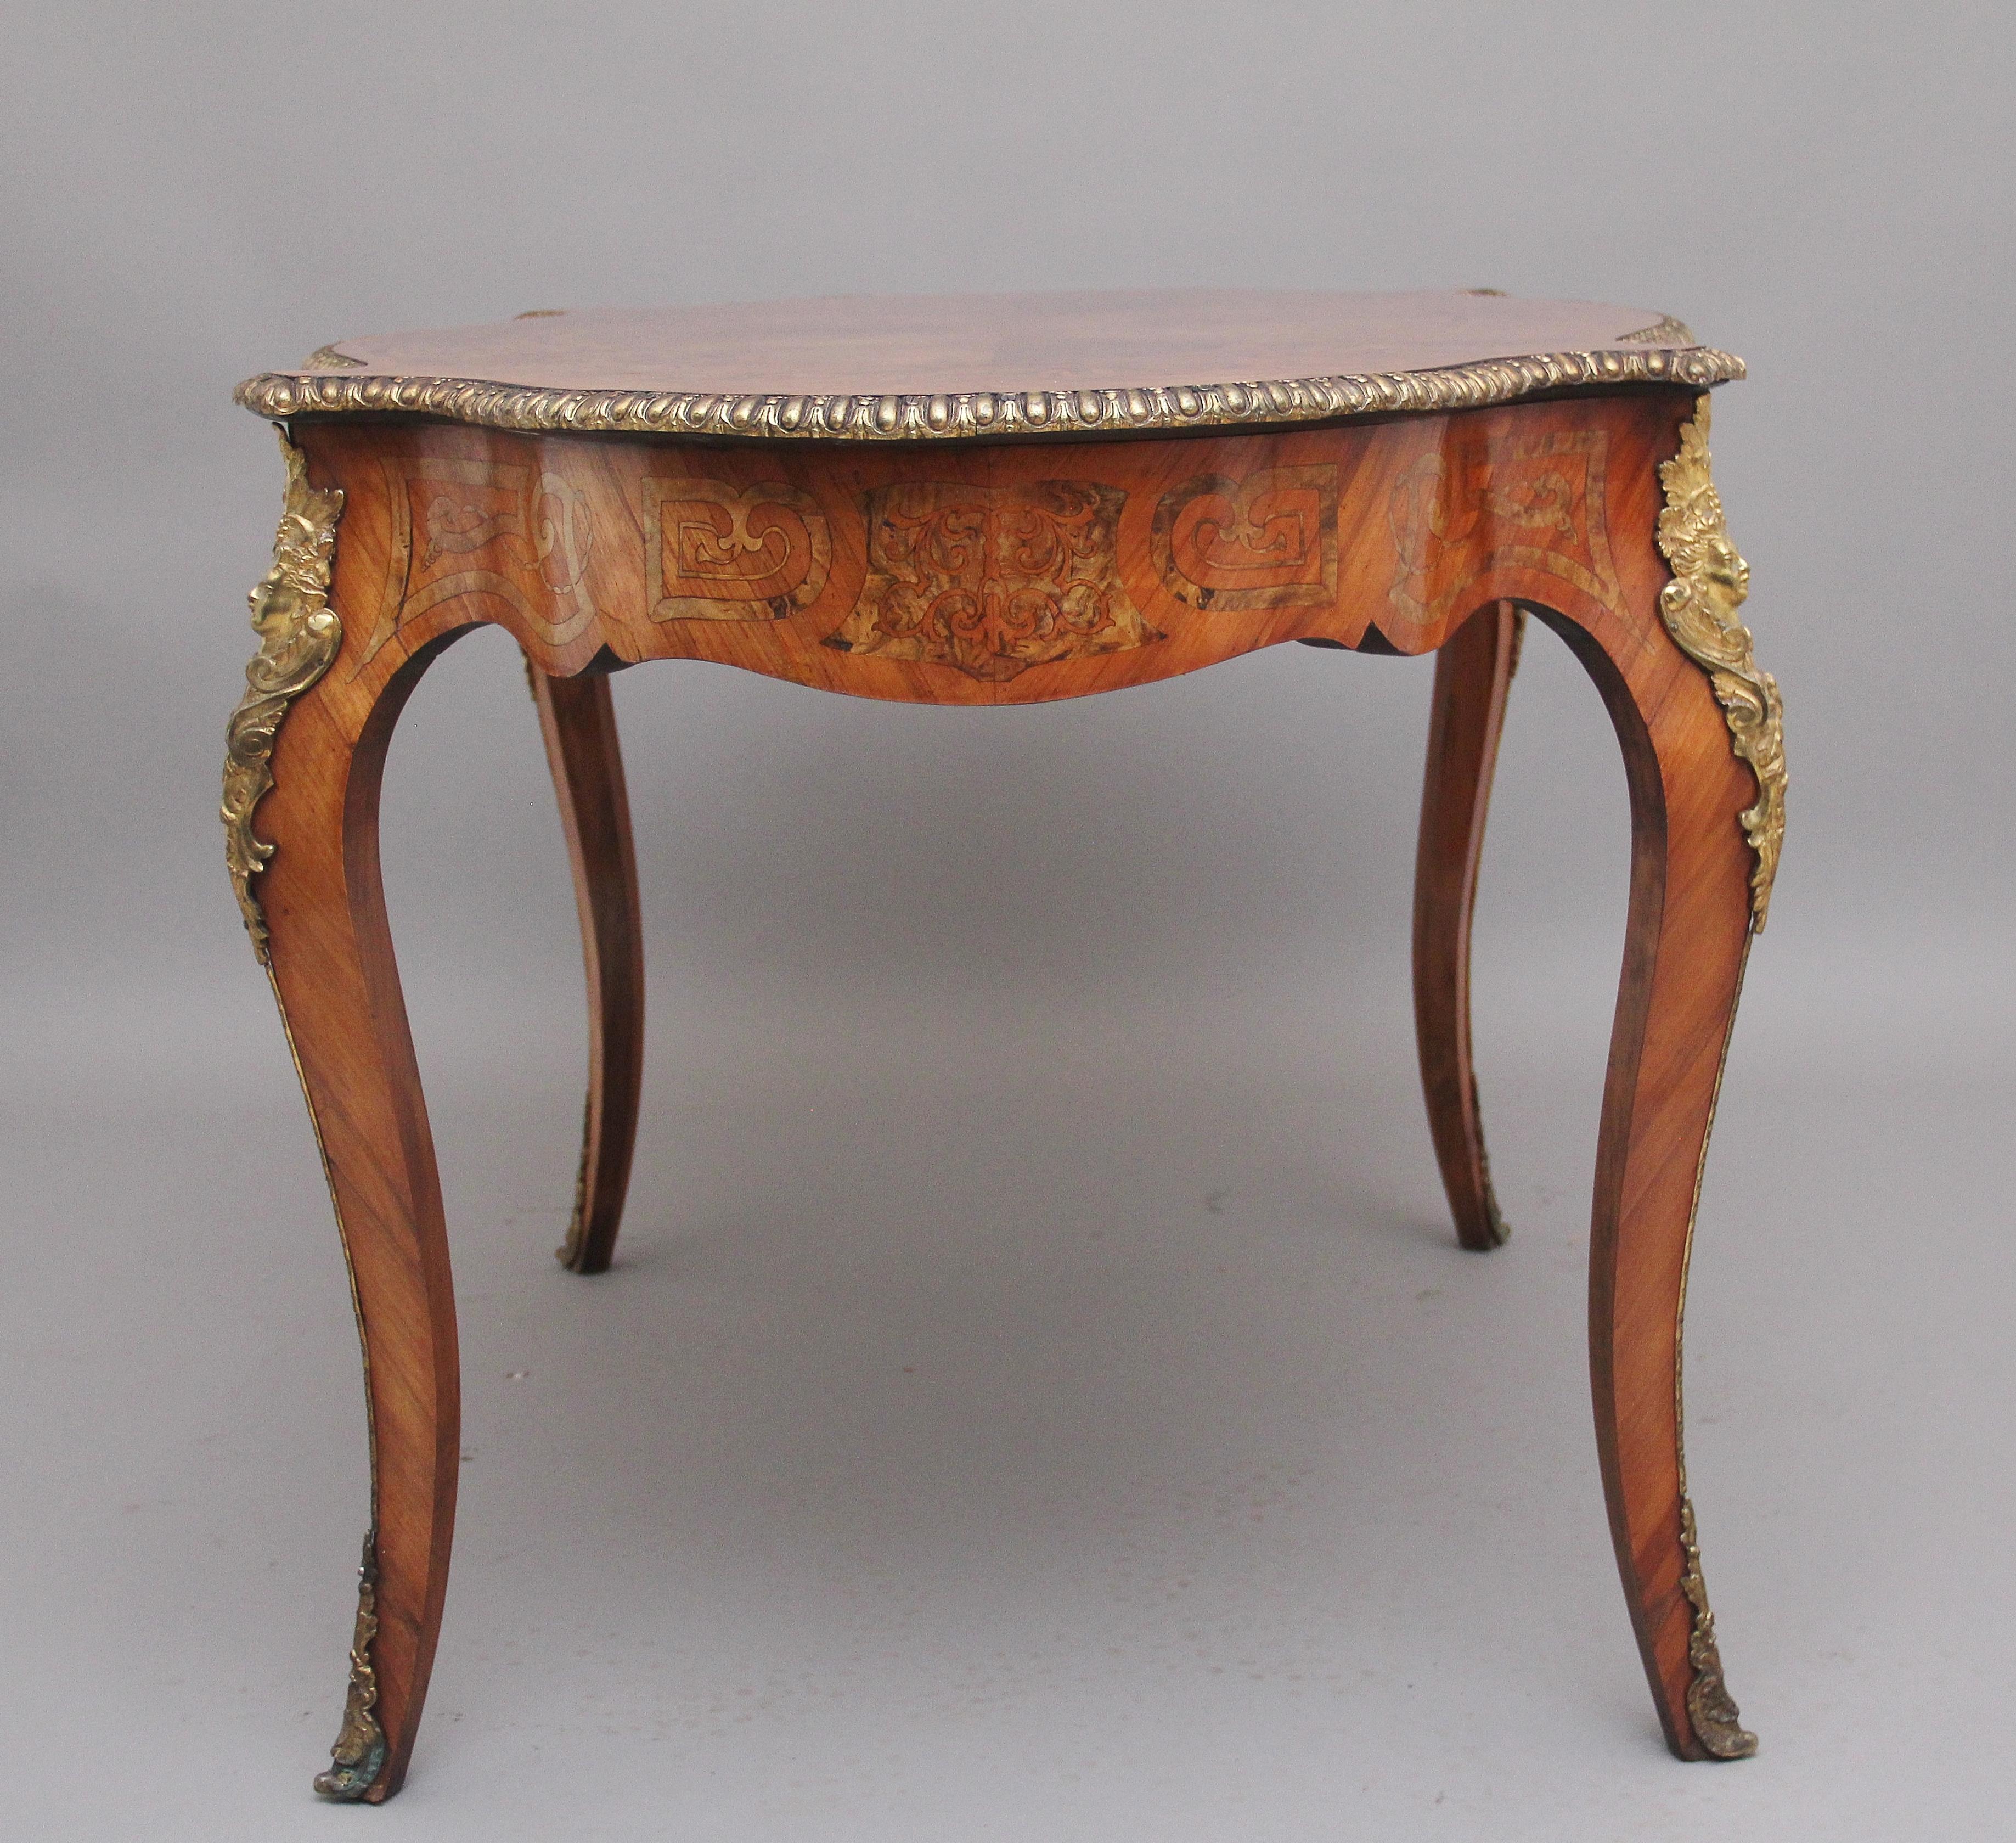 British Superb Quality 19th Century Walnut and Inlaid Centre Table For Sale